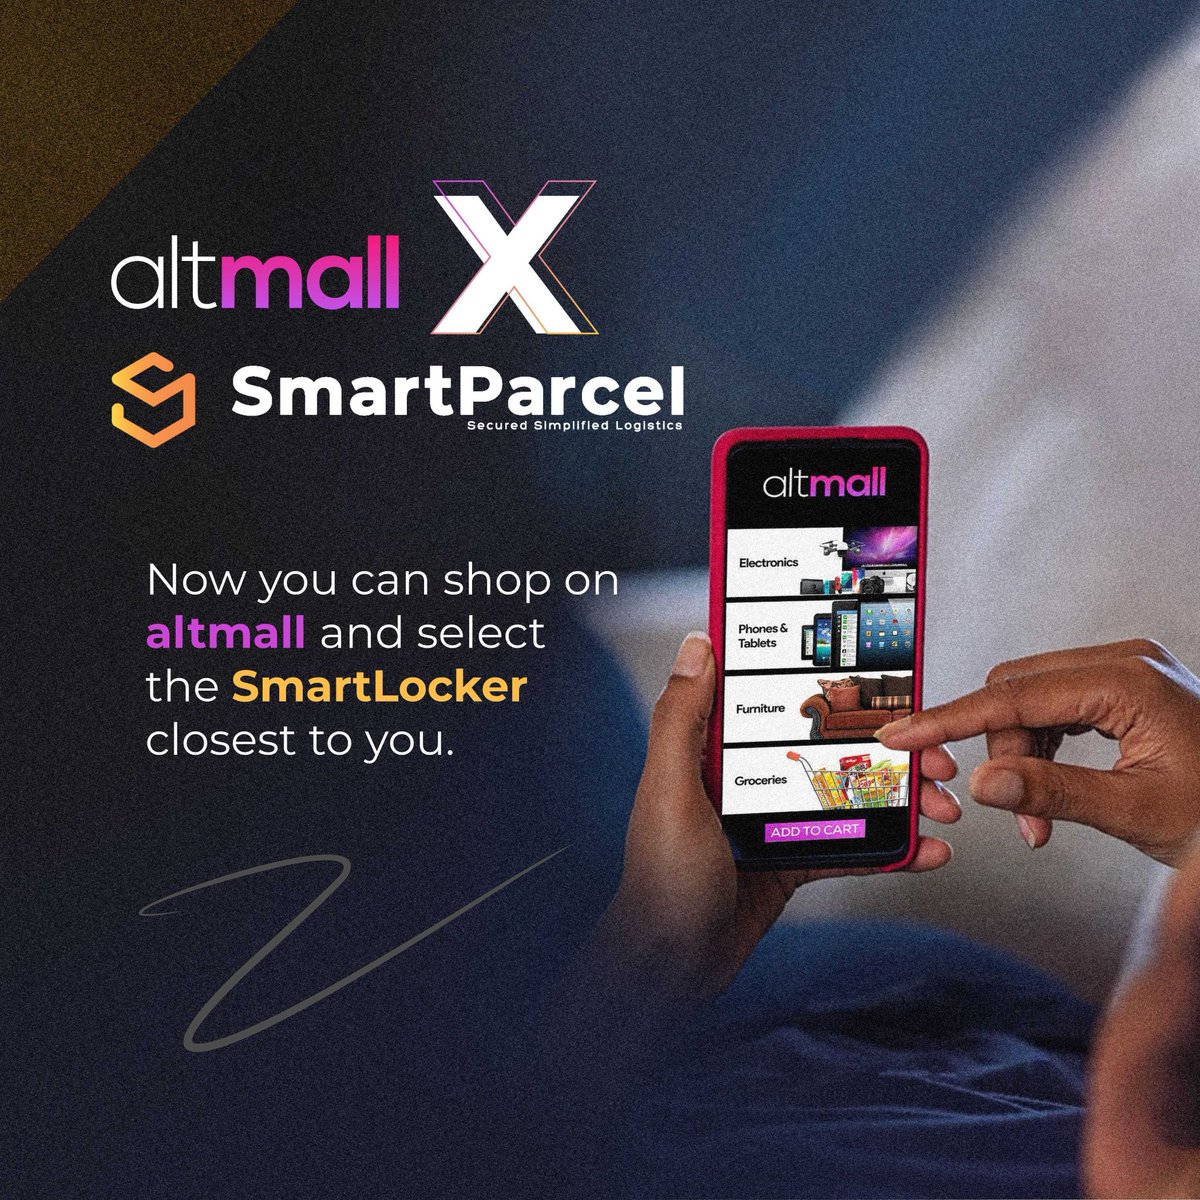 RT @smartparcelng: We are delighted to announce our partnership with Altmall from Sterling Bank Plc Altmall is an online store that allows customers to choose from a variety of great products and make payments in installments.